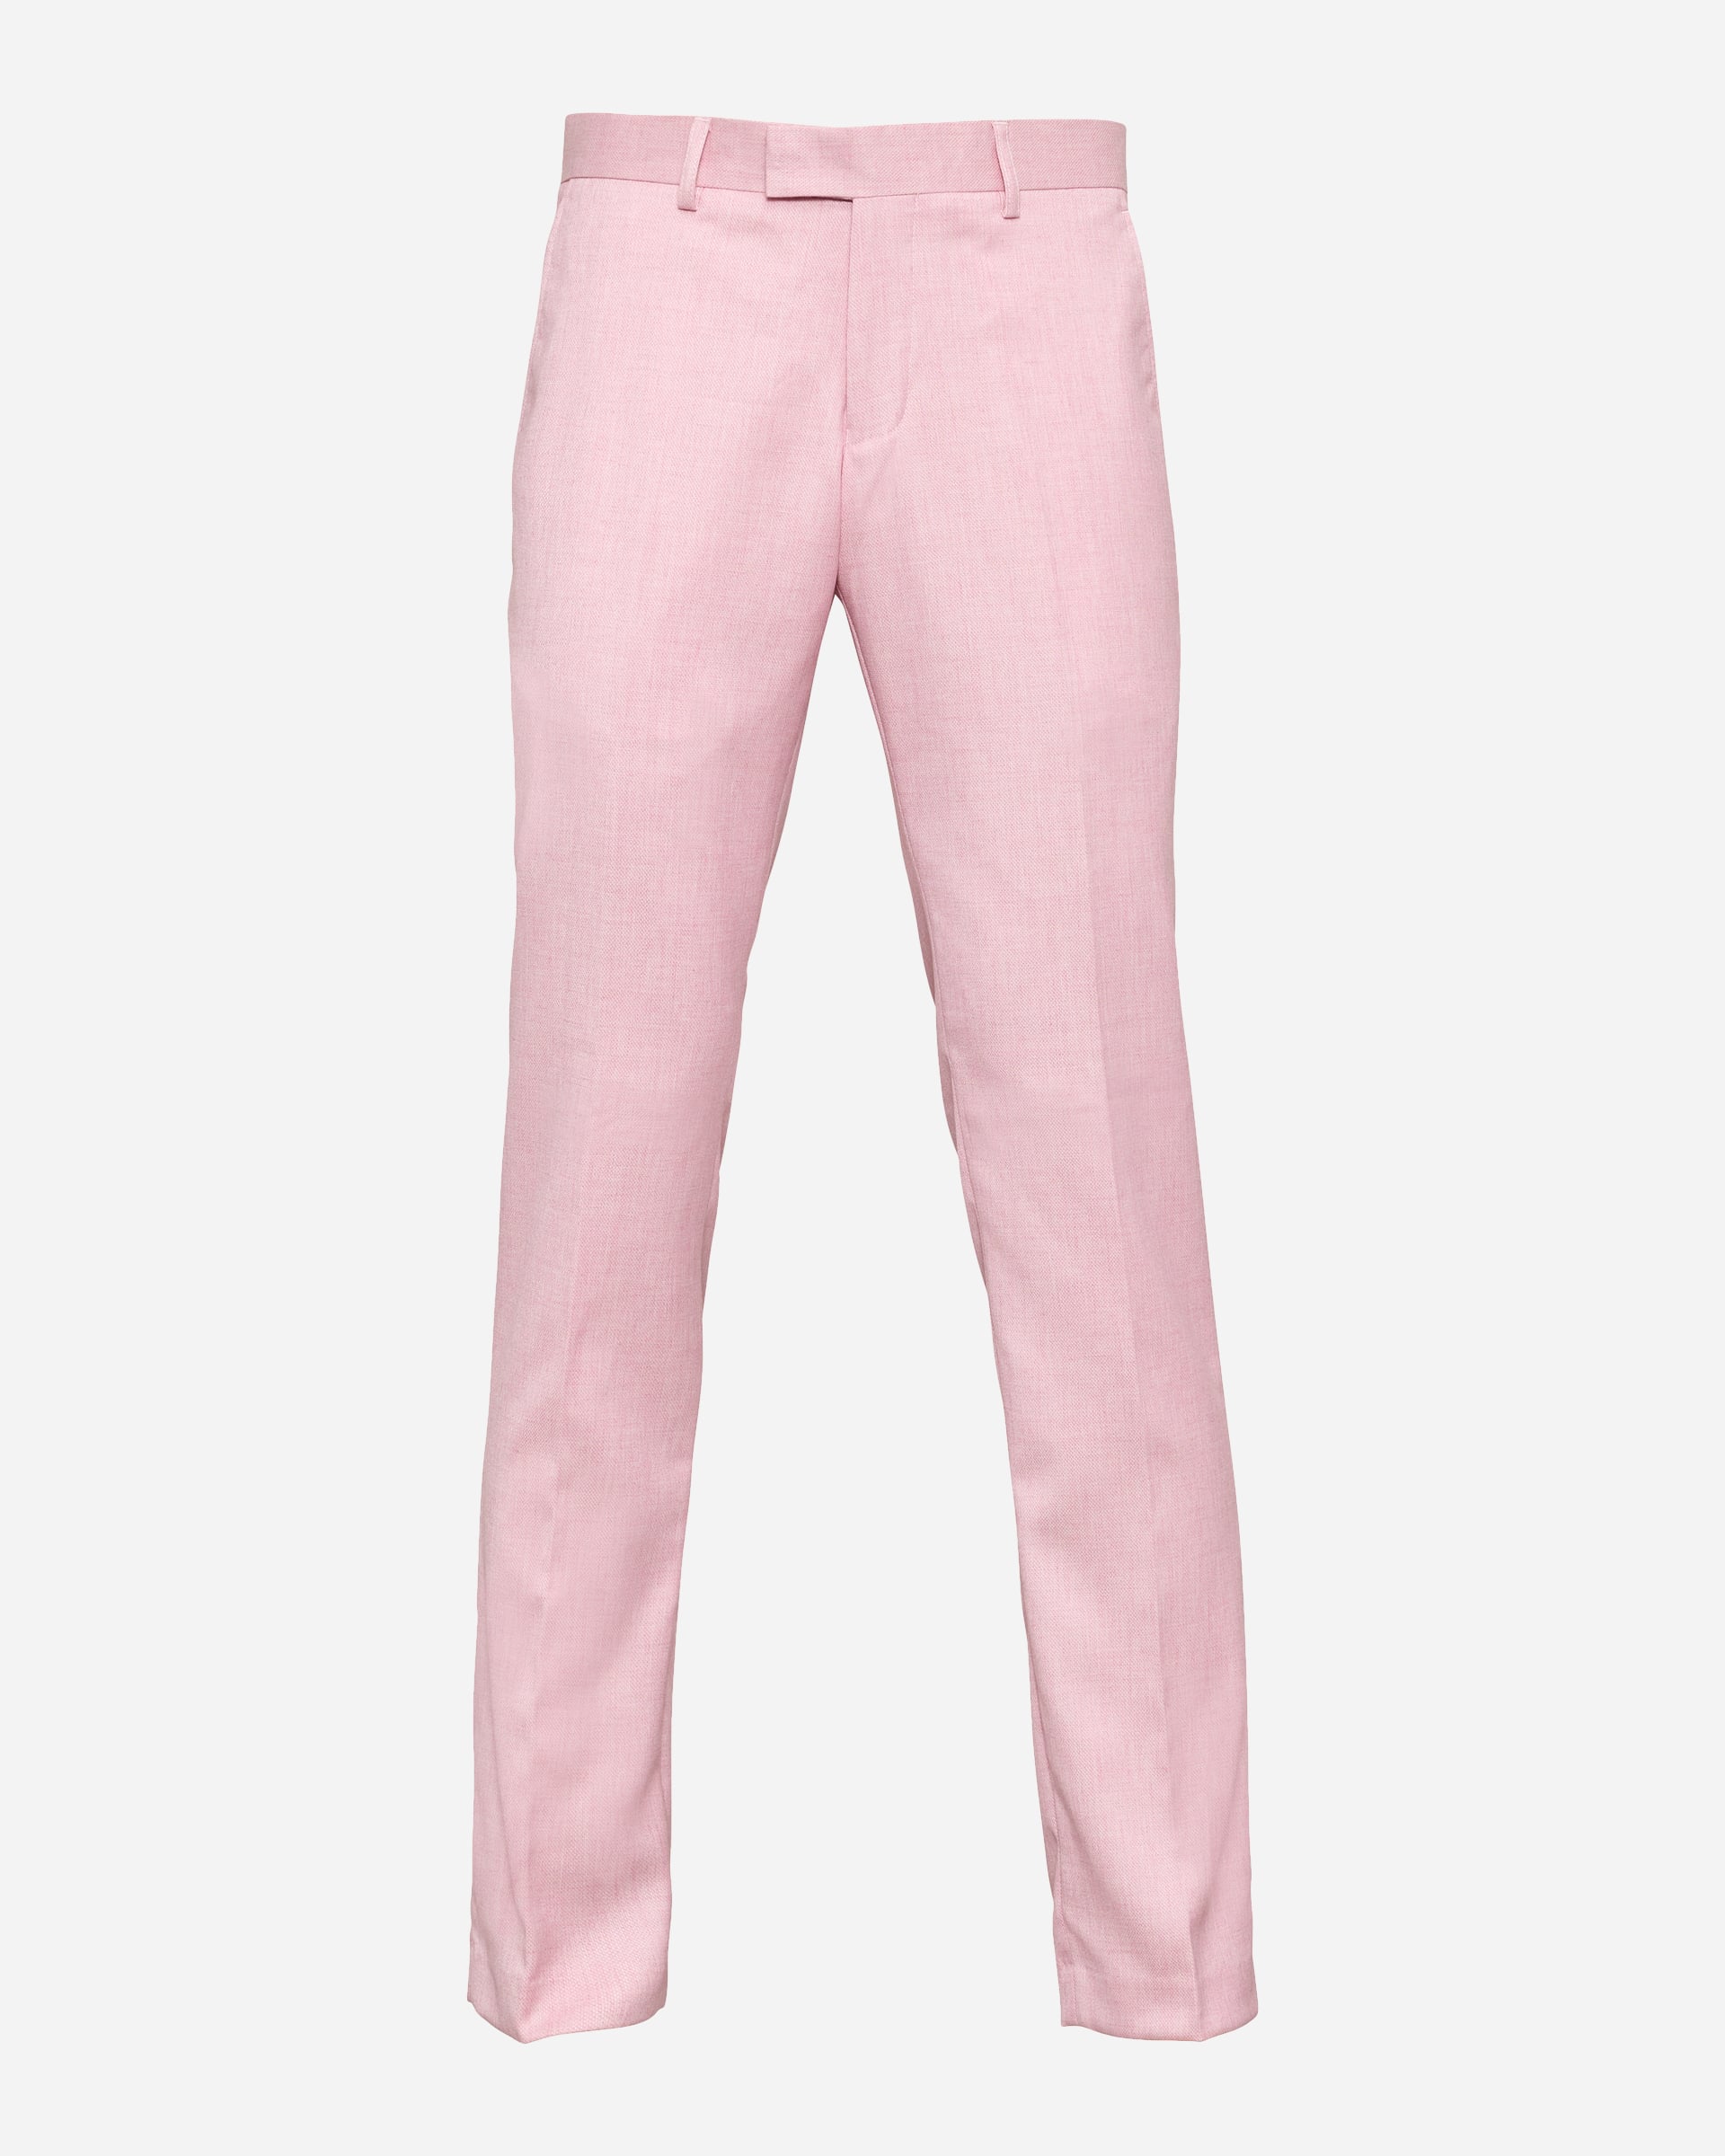 Corbell Pink Suit - Men's Suits at Menzclub